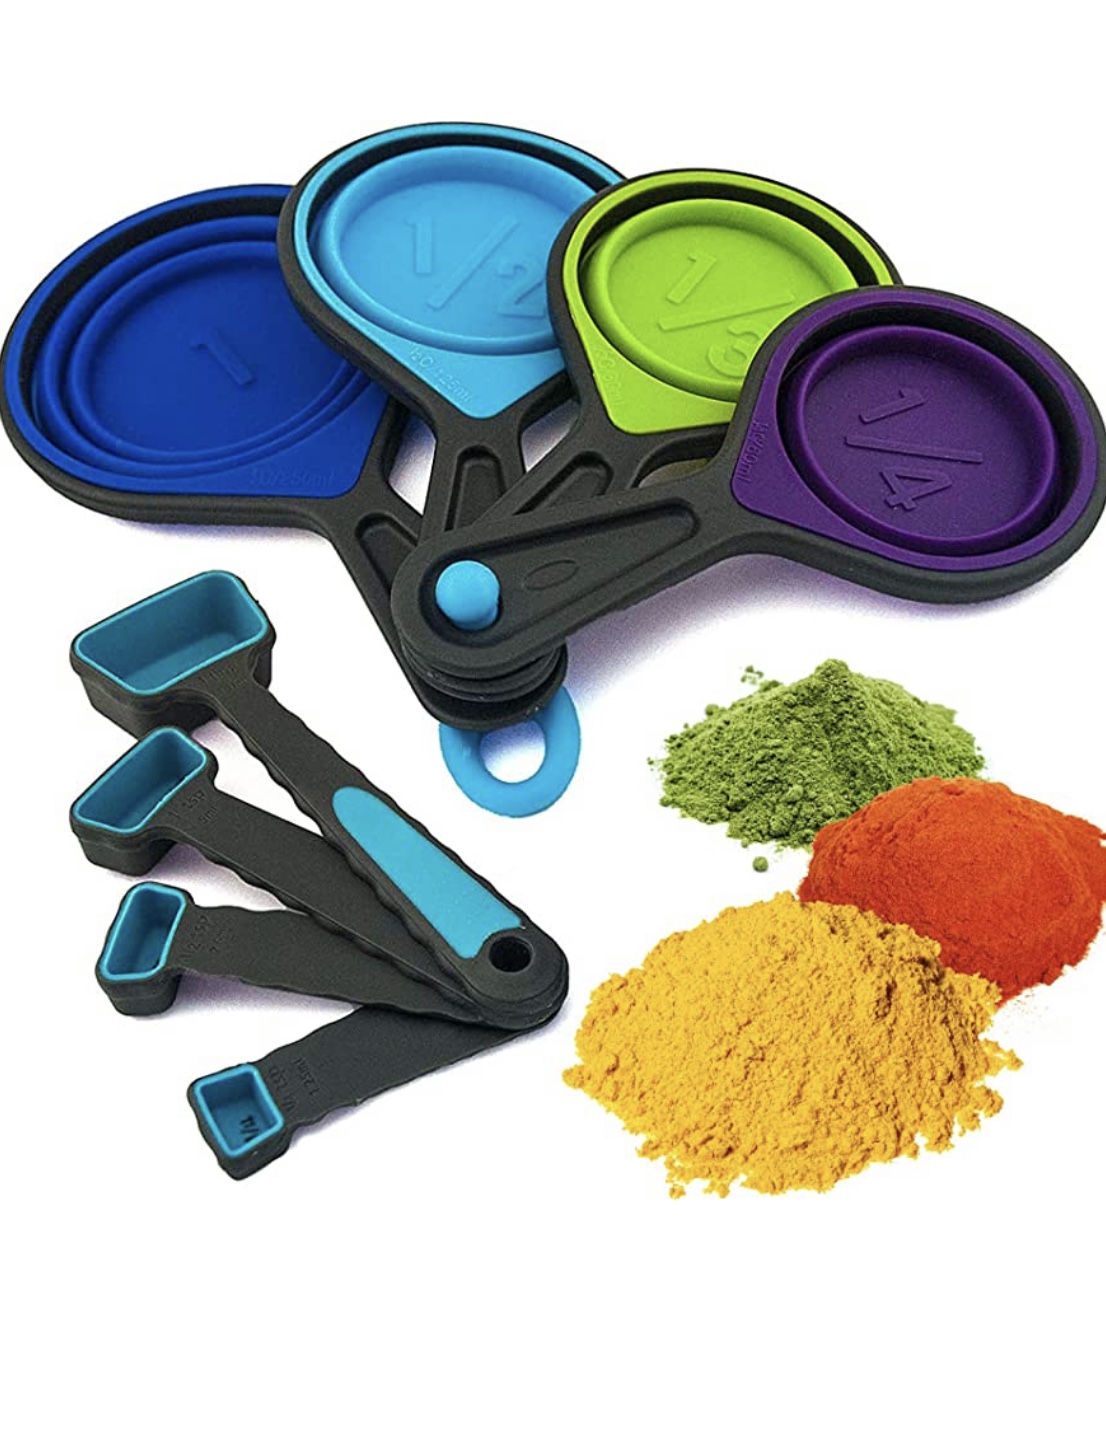 Silicone Collapsible Measuring Cup And Spoon Set 8-piece Measuring